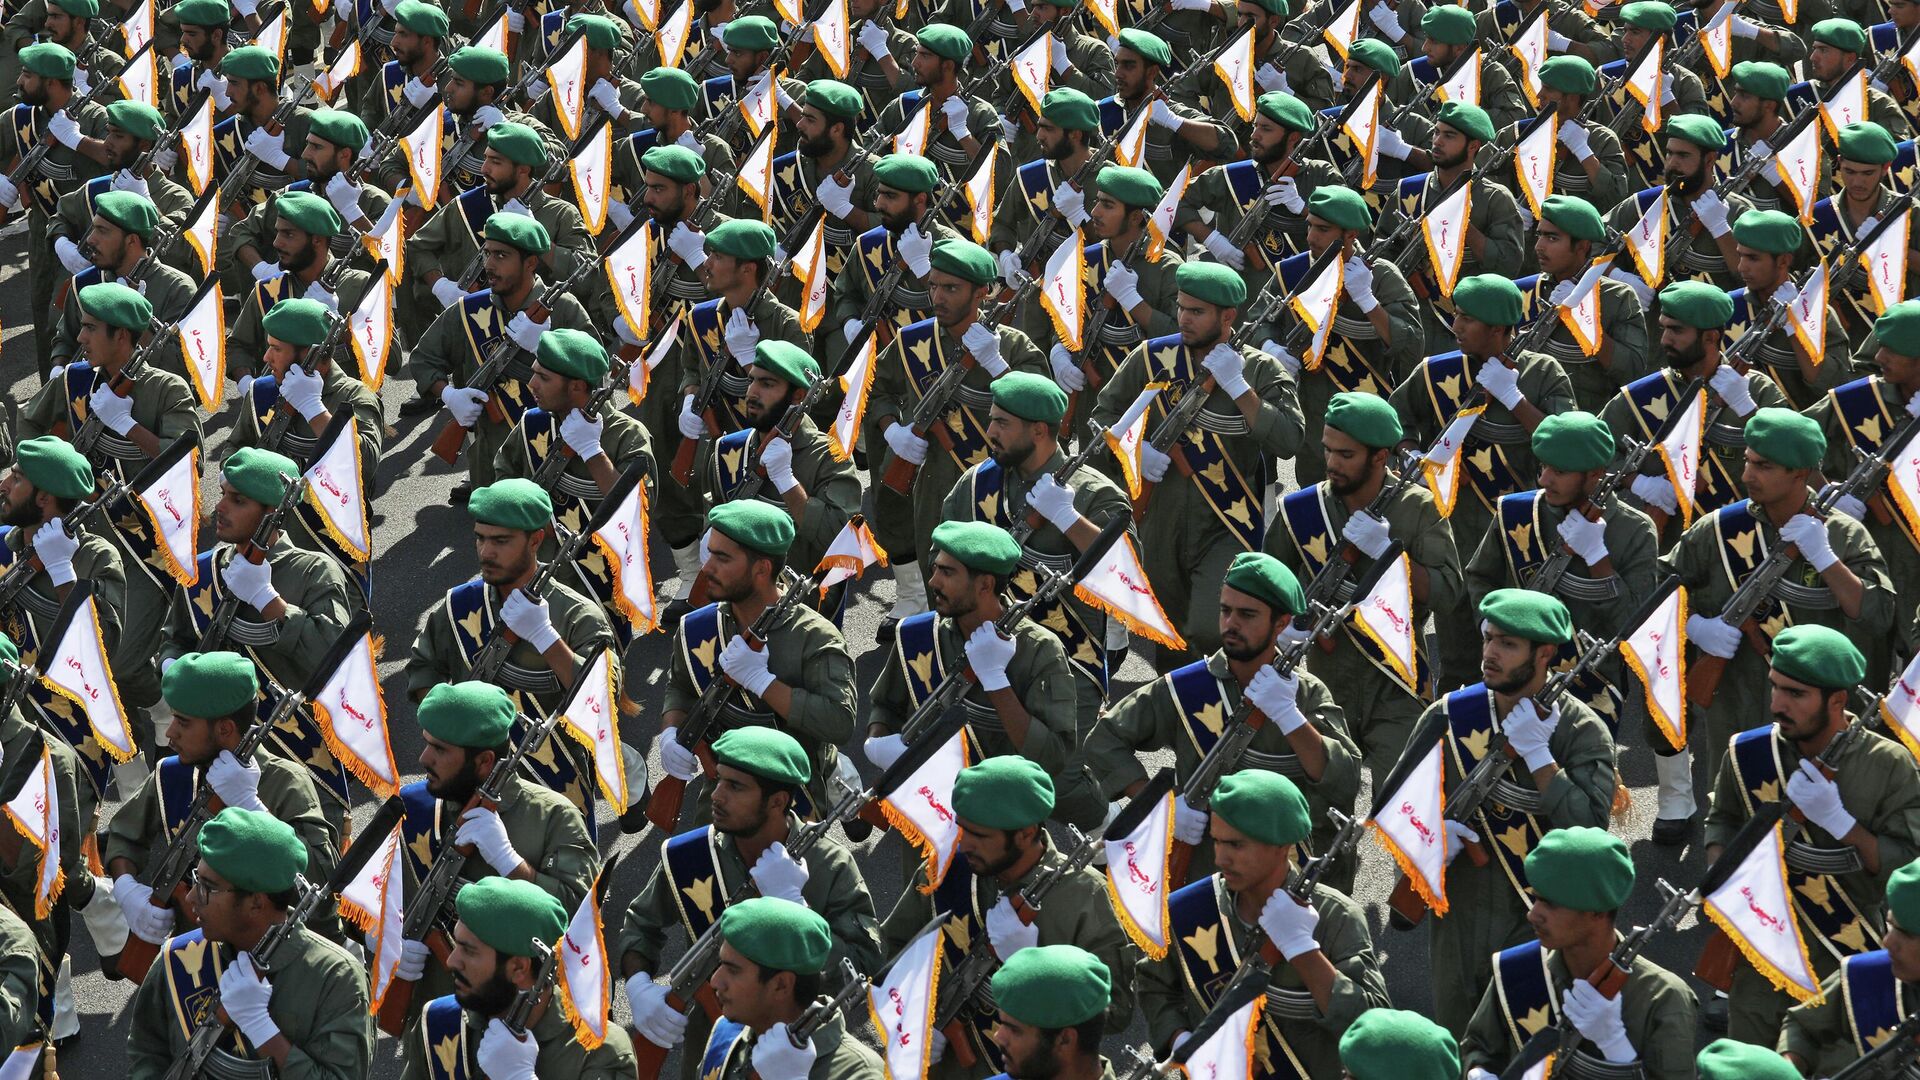 Iran's paramilitary Revolutionary Guard troops march during a military parade commemorating the anniversary of the start of the 1980-88 Iraq-Iran war, in front of the shrine of the late revolutionary founder Ayatollah Khomeini, just outside Tehran, Iran, Thursday, Sept. 22, 2022 - Sputnik International, 1920, 24.06.2023